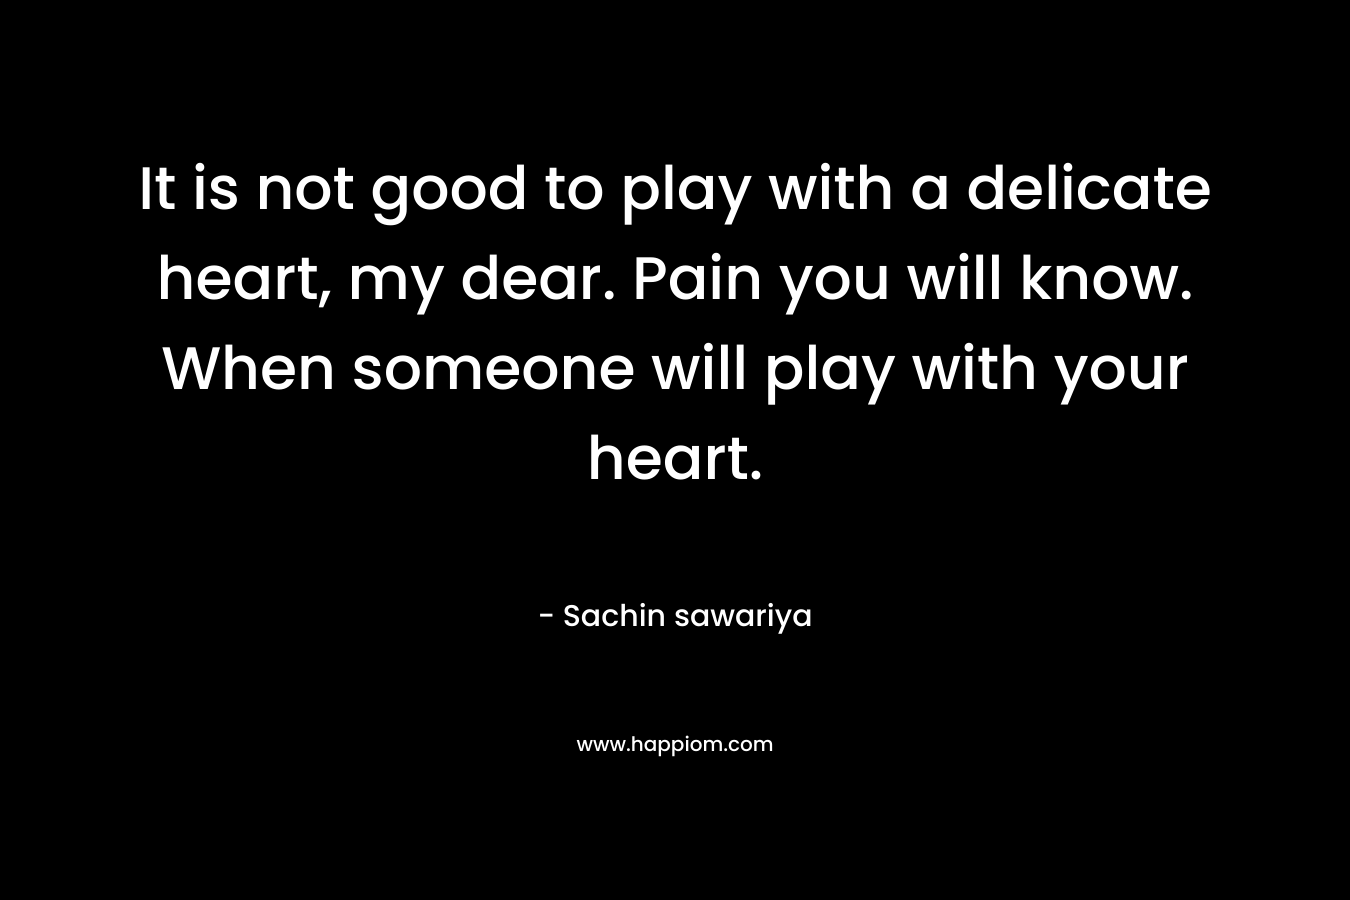 It is not good to play with a delicate heart, my dear. Pain you will know. When someone will play with your heart. – Sachin sawariya